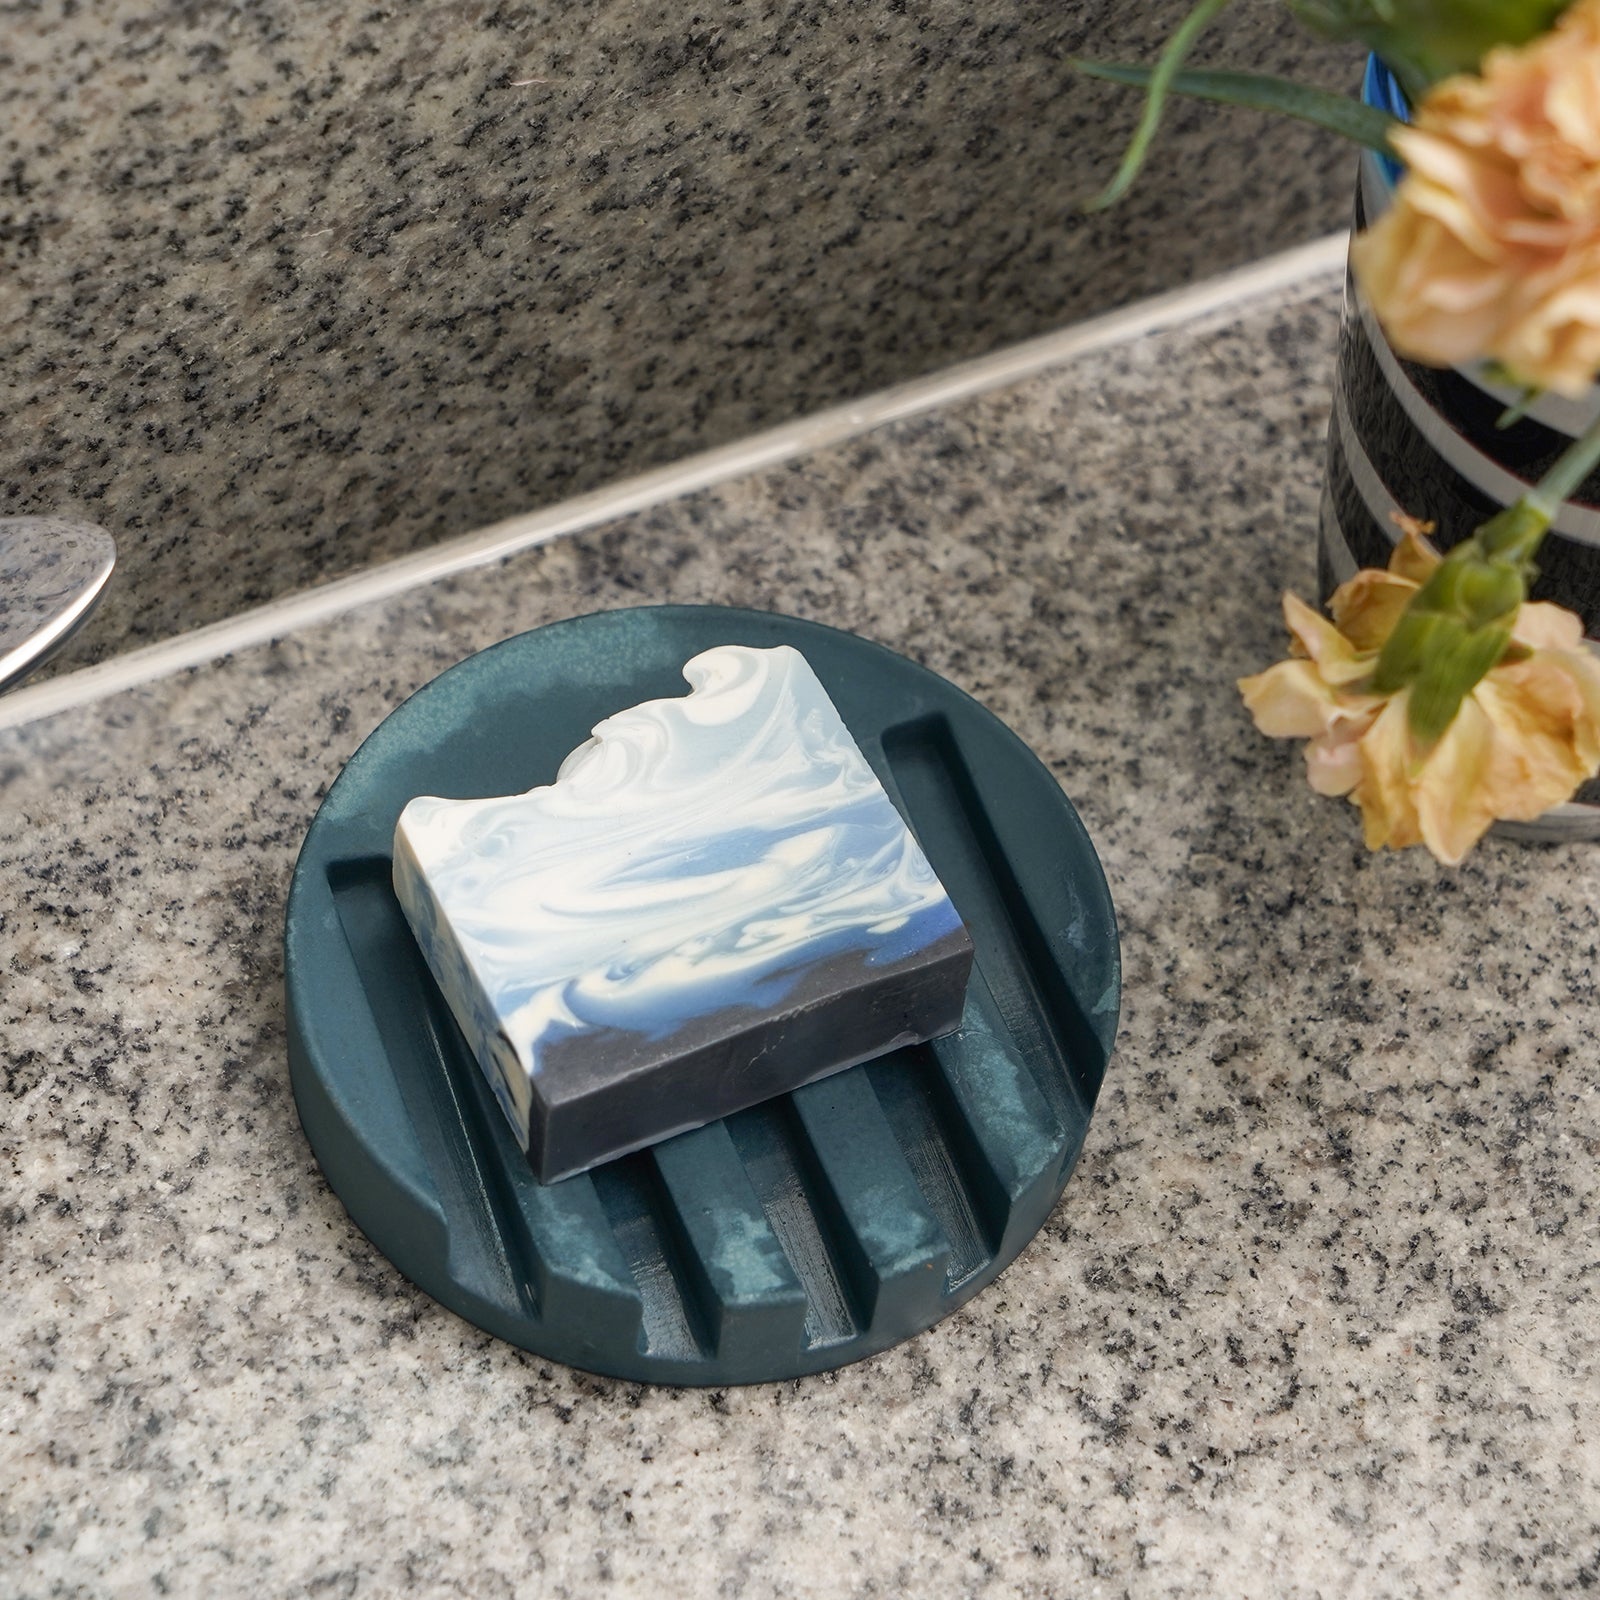 Concrete Soap Holder Mold Creative Design of Cement Soap Silicone Molds  Bathroom Furnishings Molds DIY Soap Tray Molds 